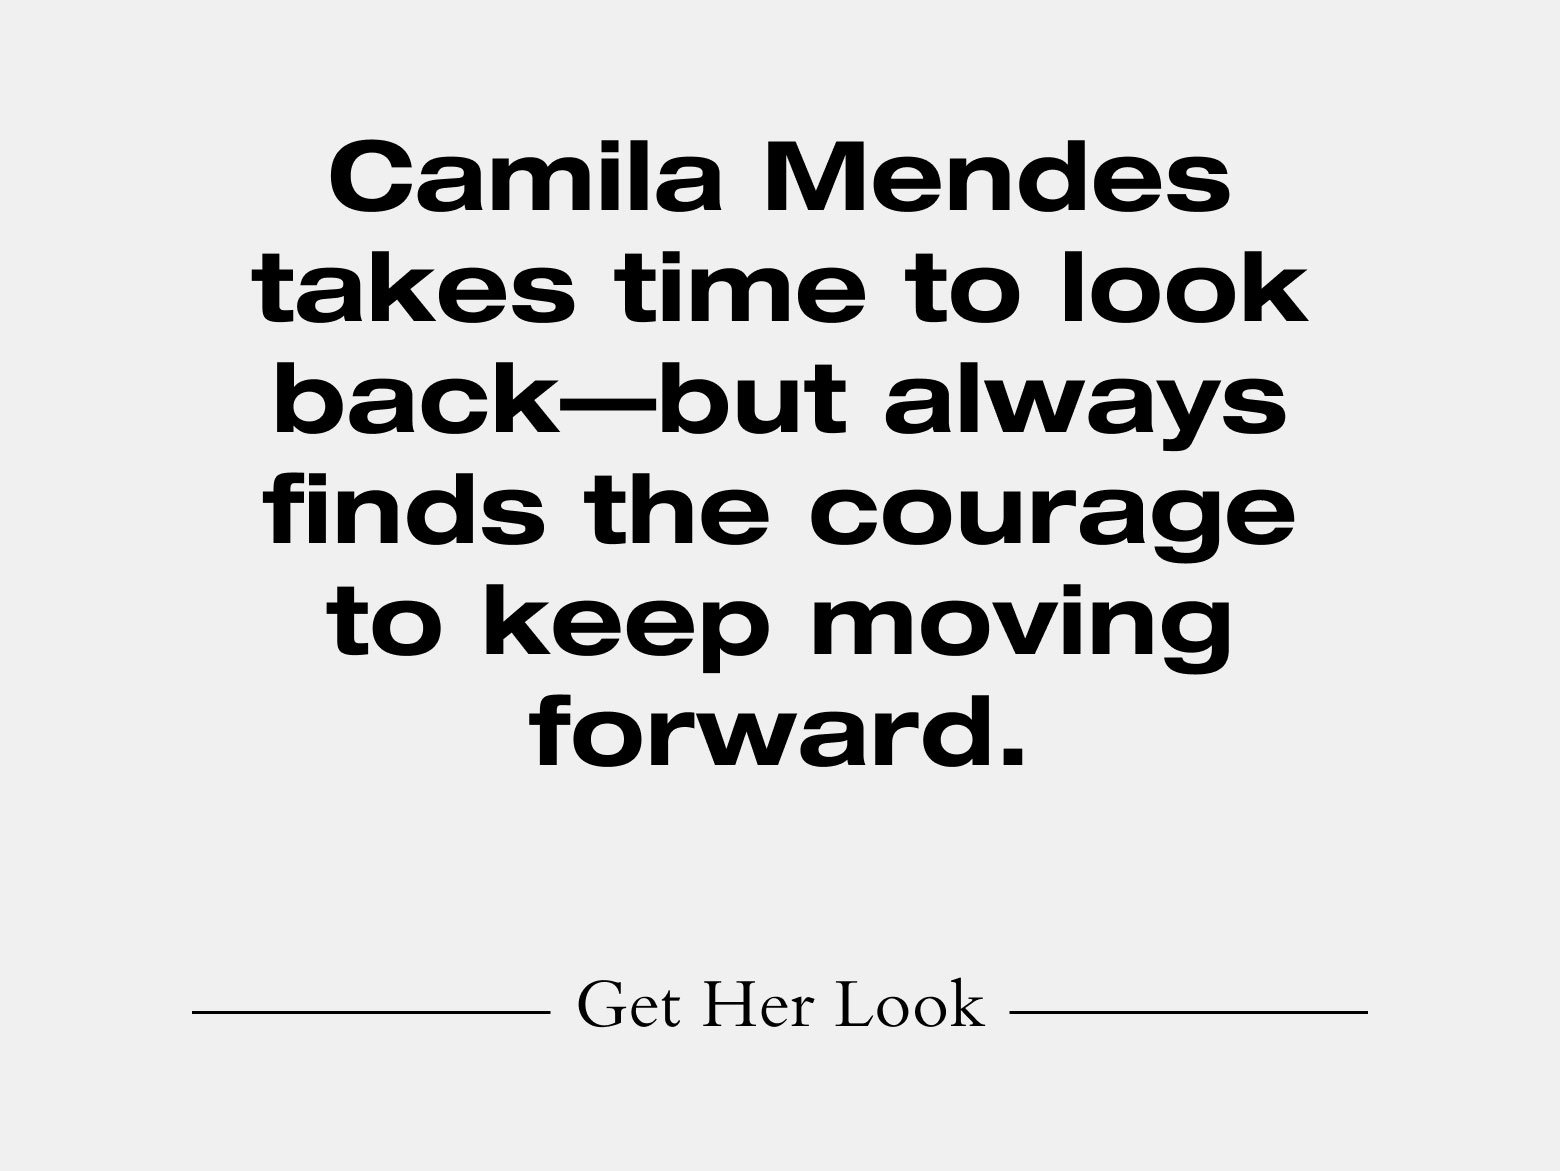 Camila Mendes takes time to look back—but always finds the courage to keep moving forward. Get her look